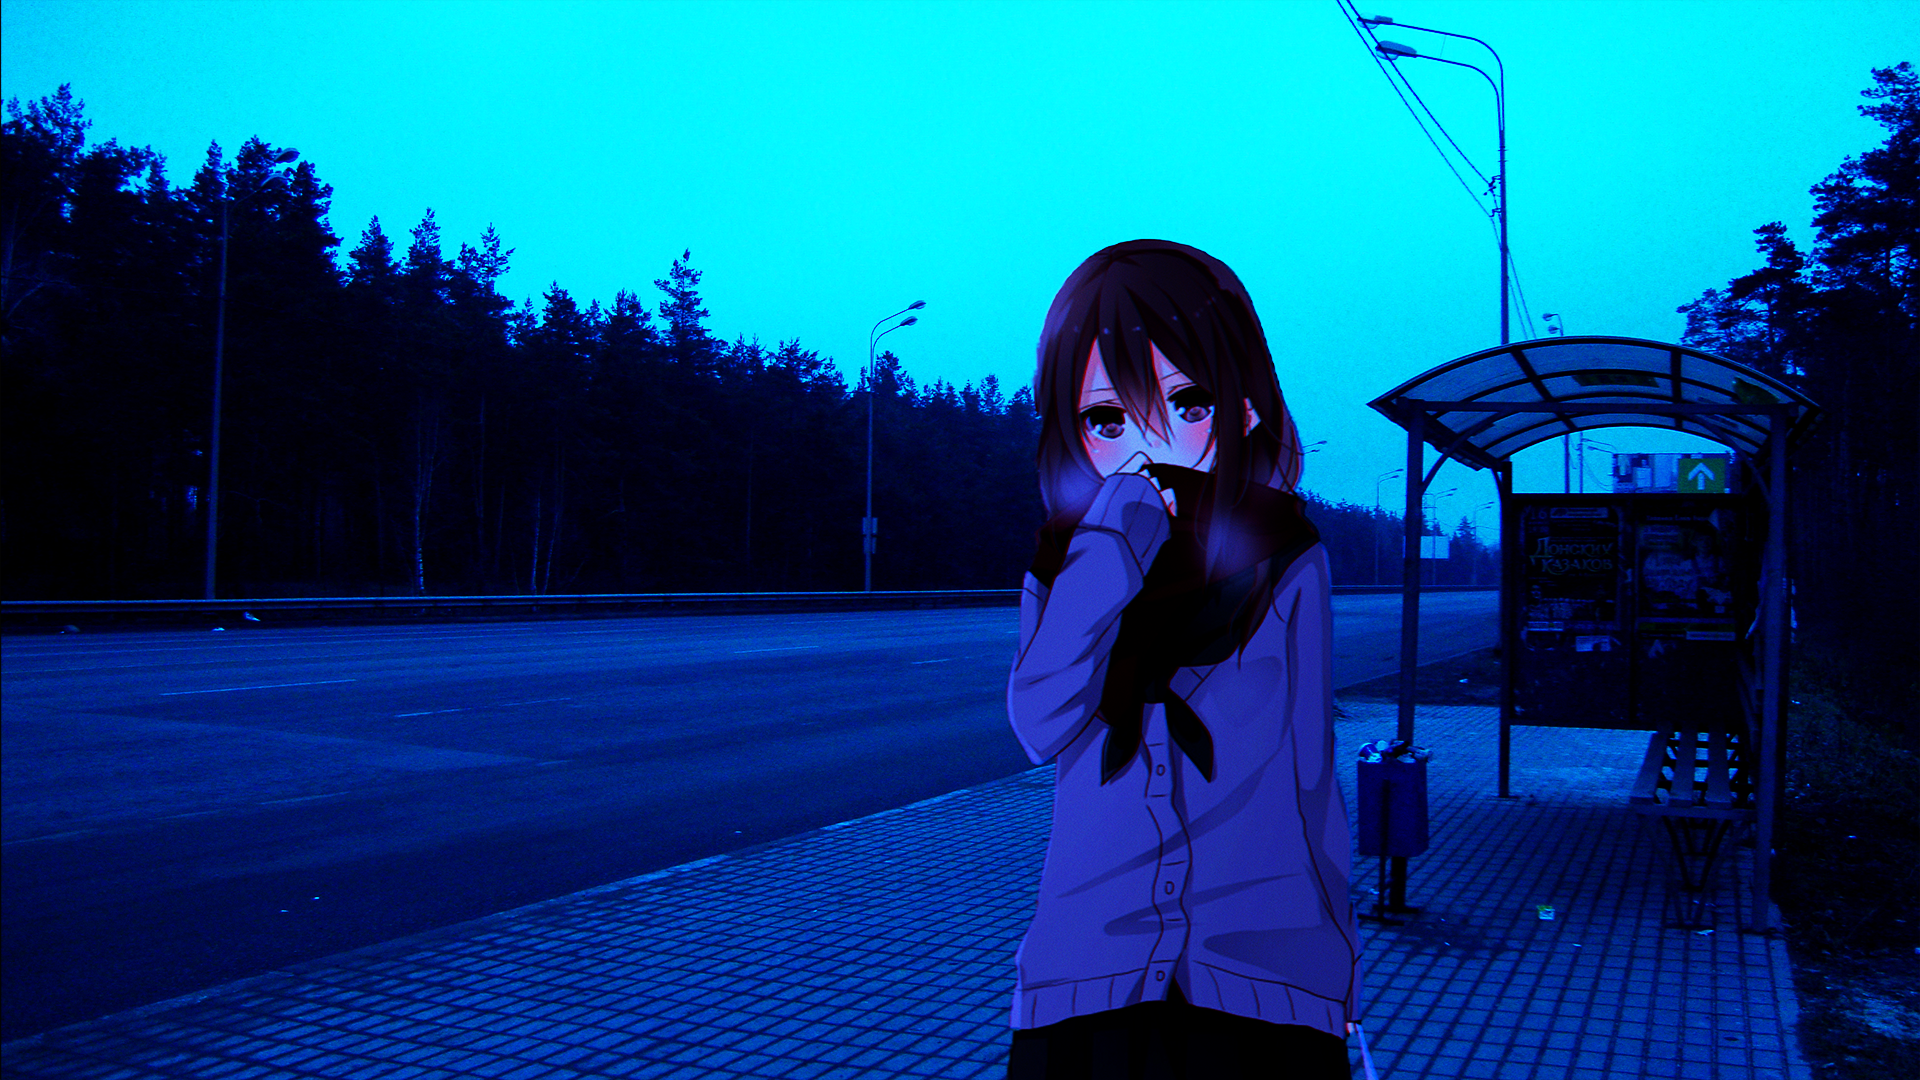 Anime Anime Irl Anime Girls Bus Stop Cold Empty Russia 1920x1080